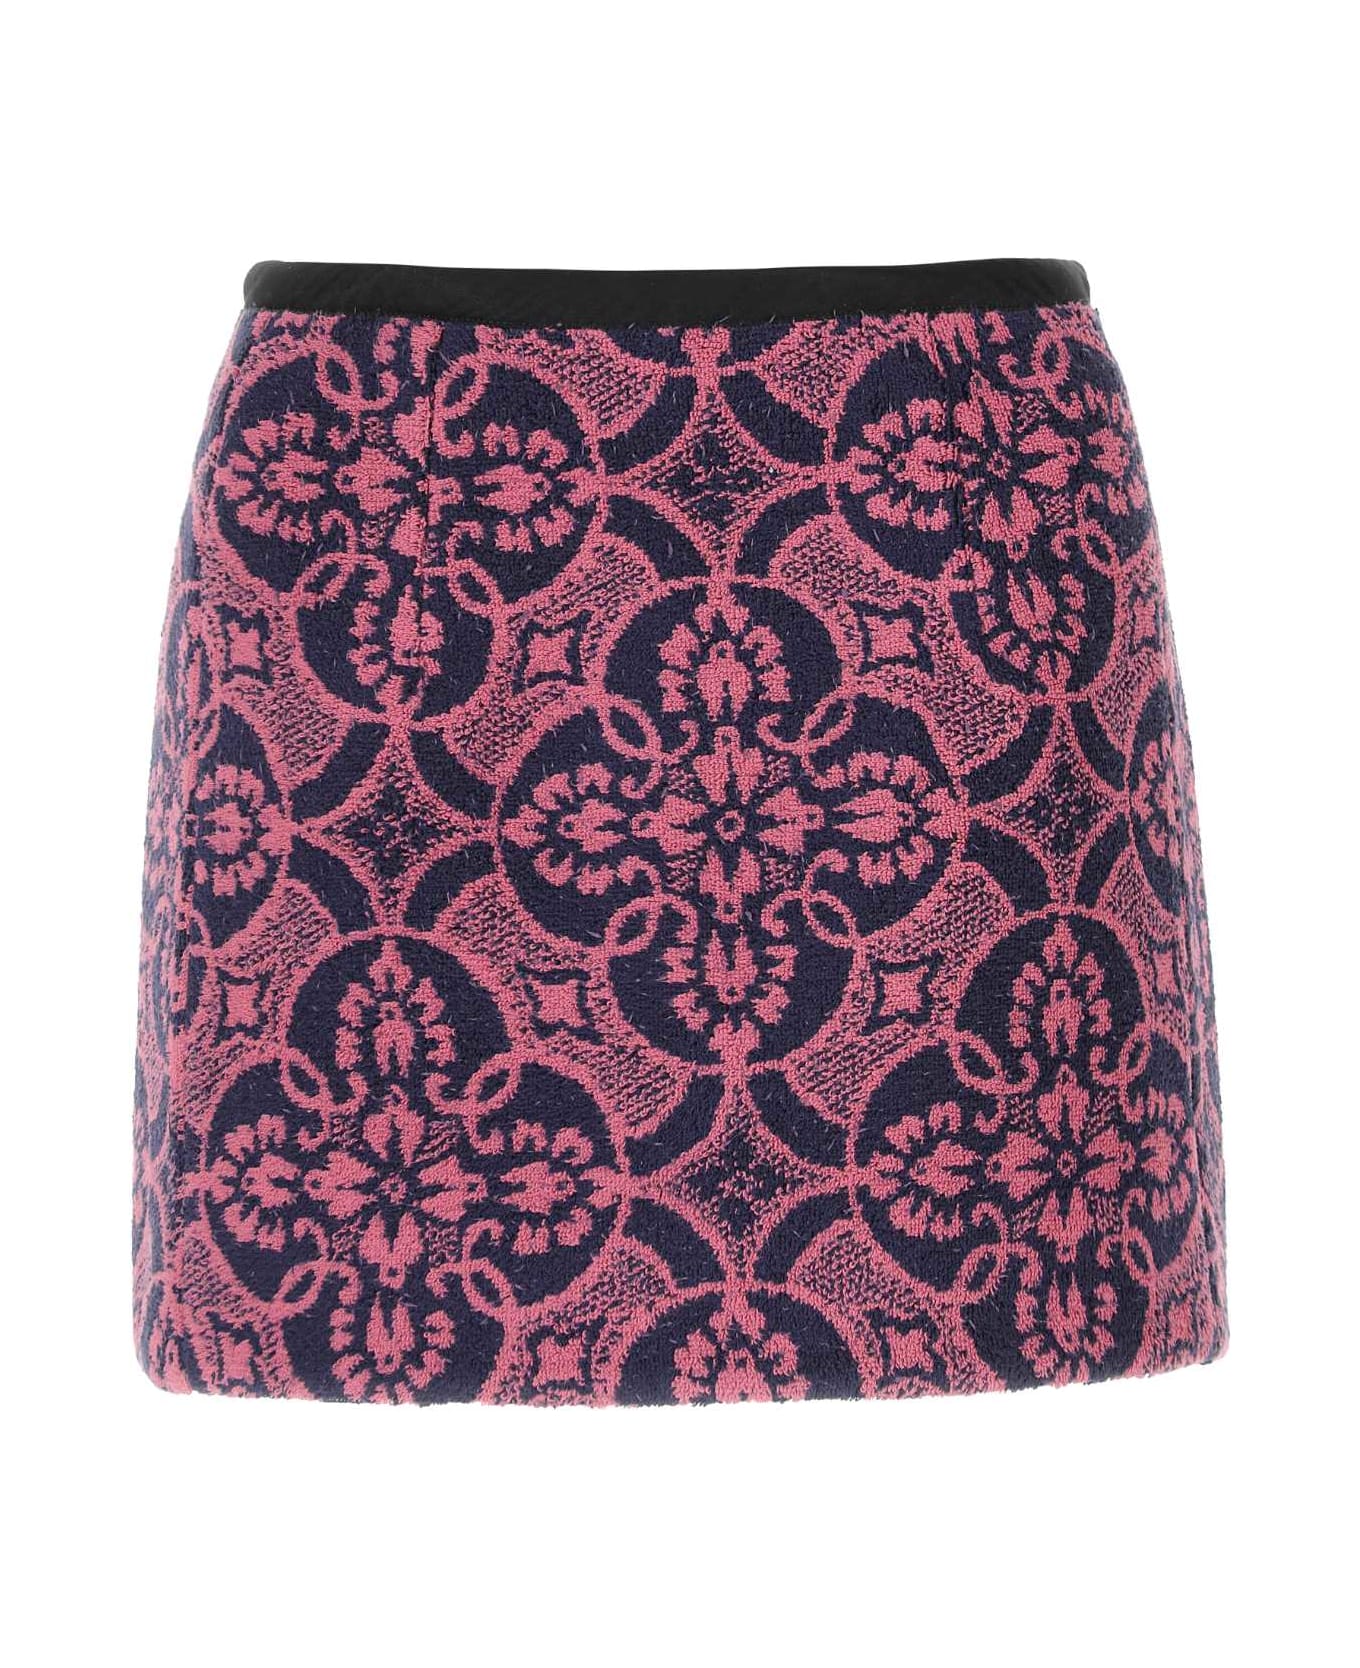 Marine Serre Embroidered Cotton And Polyester Mini Skirt - Multicolor スカート